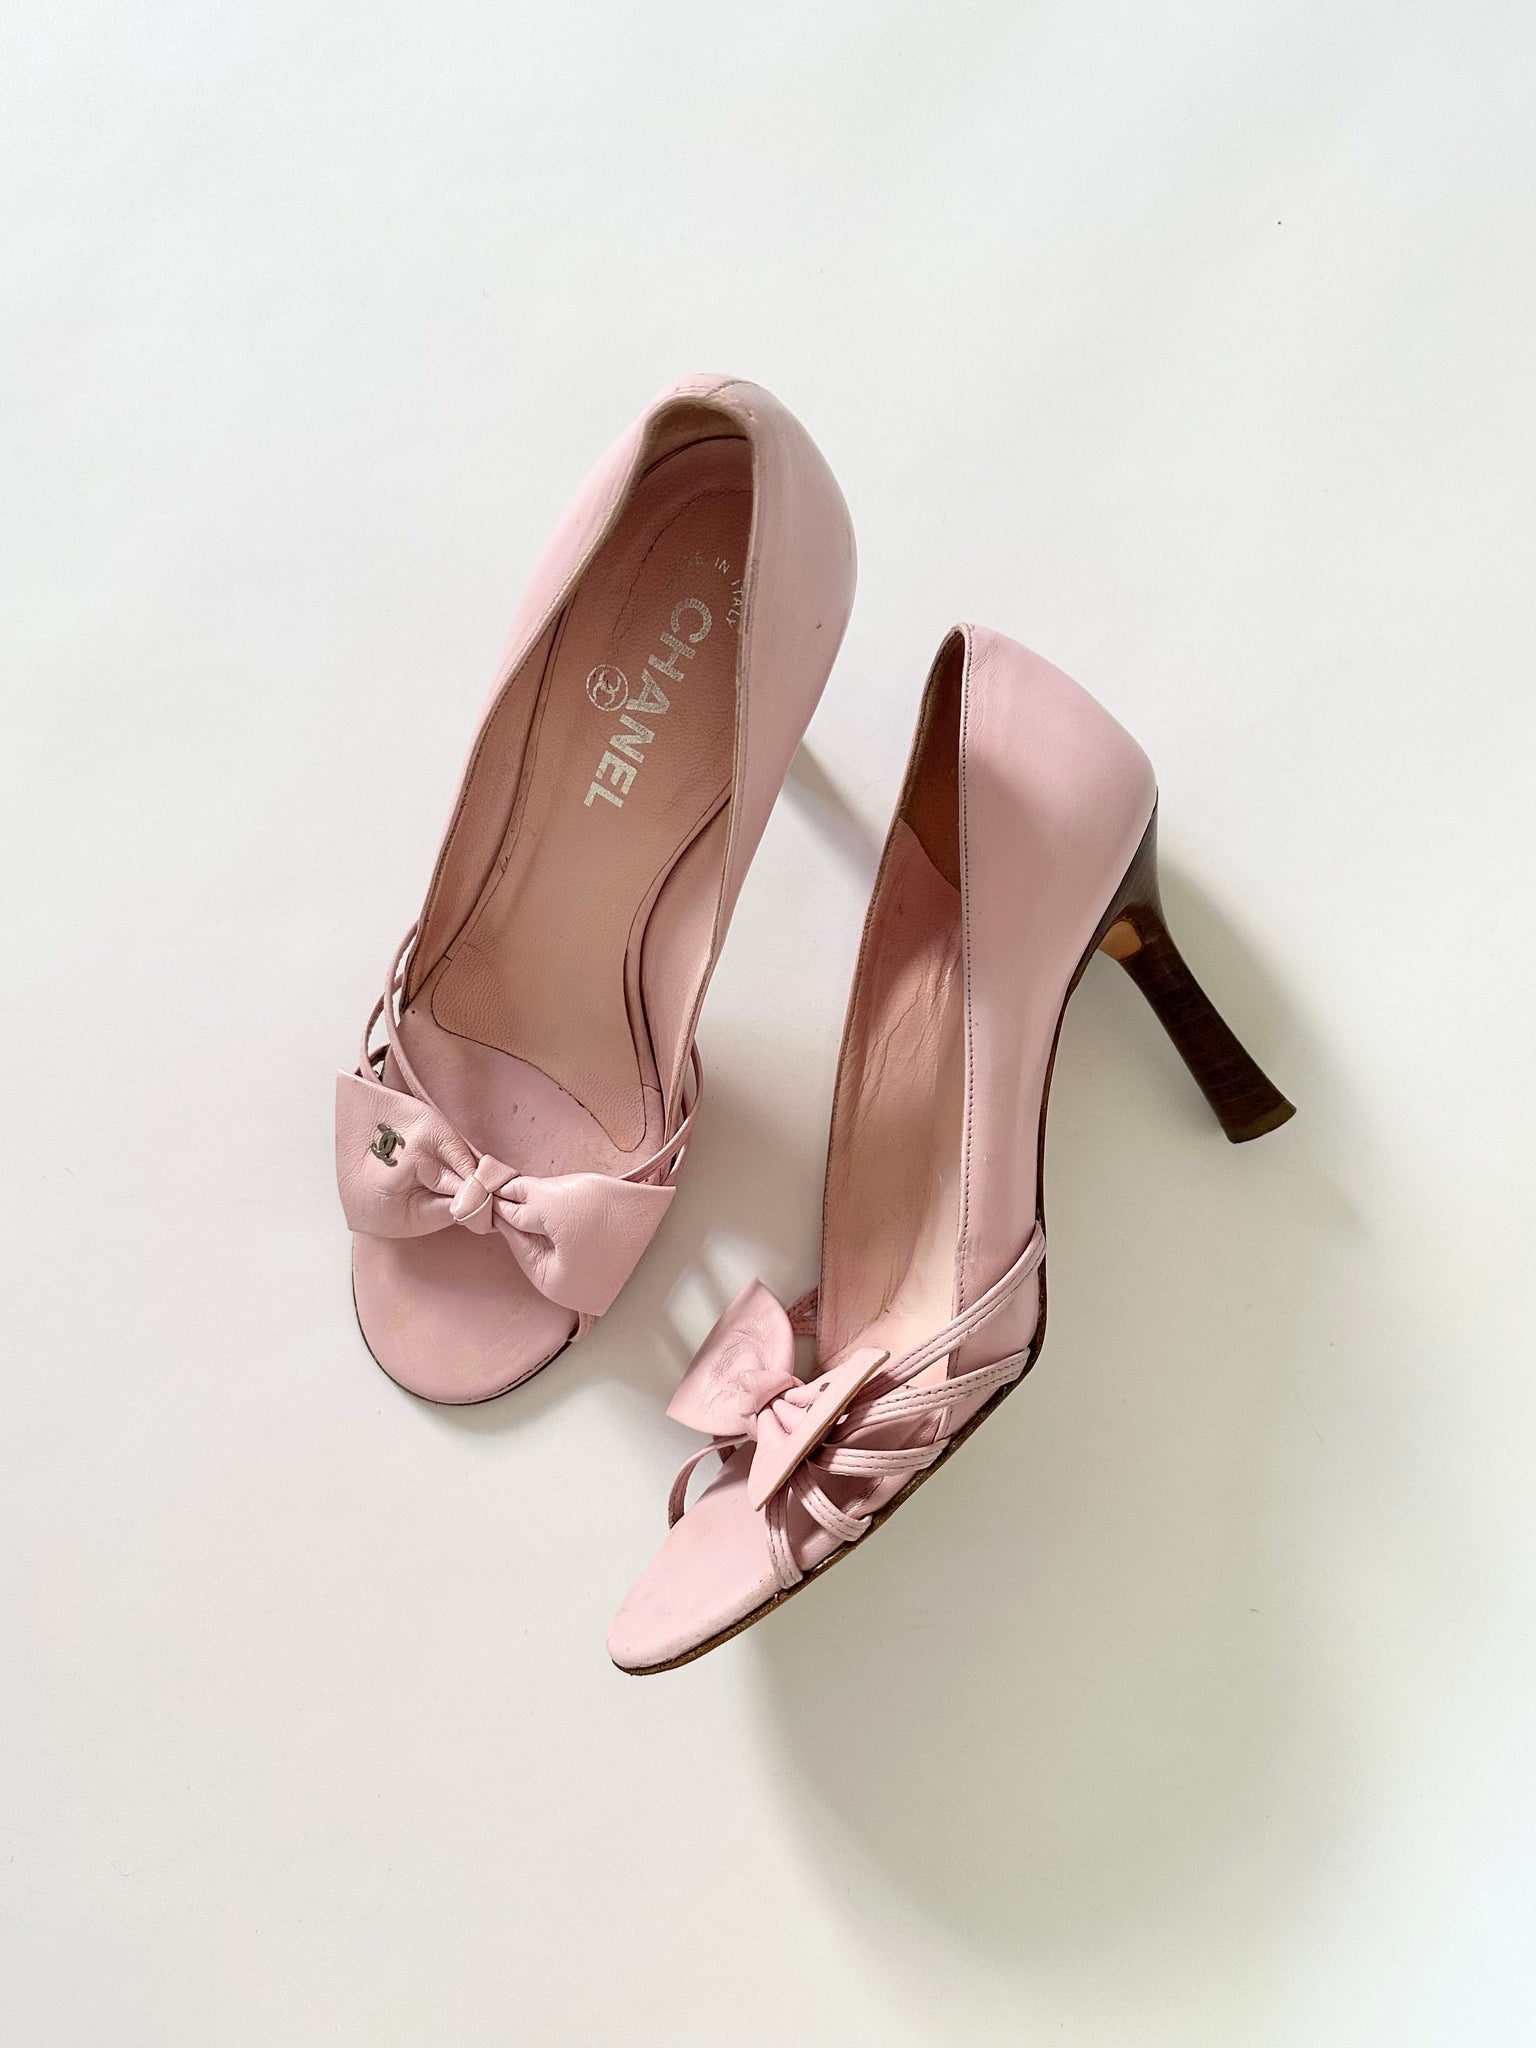 NEW CHANEL Pumps Leather Pale Pink White Kitten Heels CC Logo Shoes 38.5  39.5